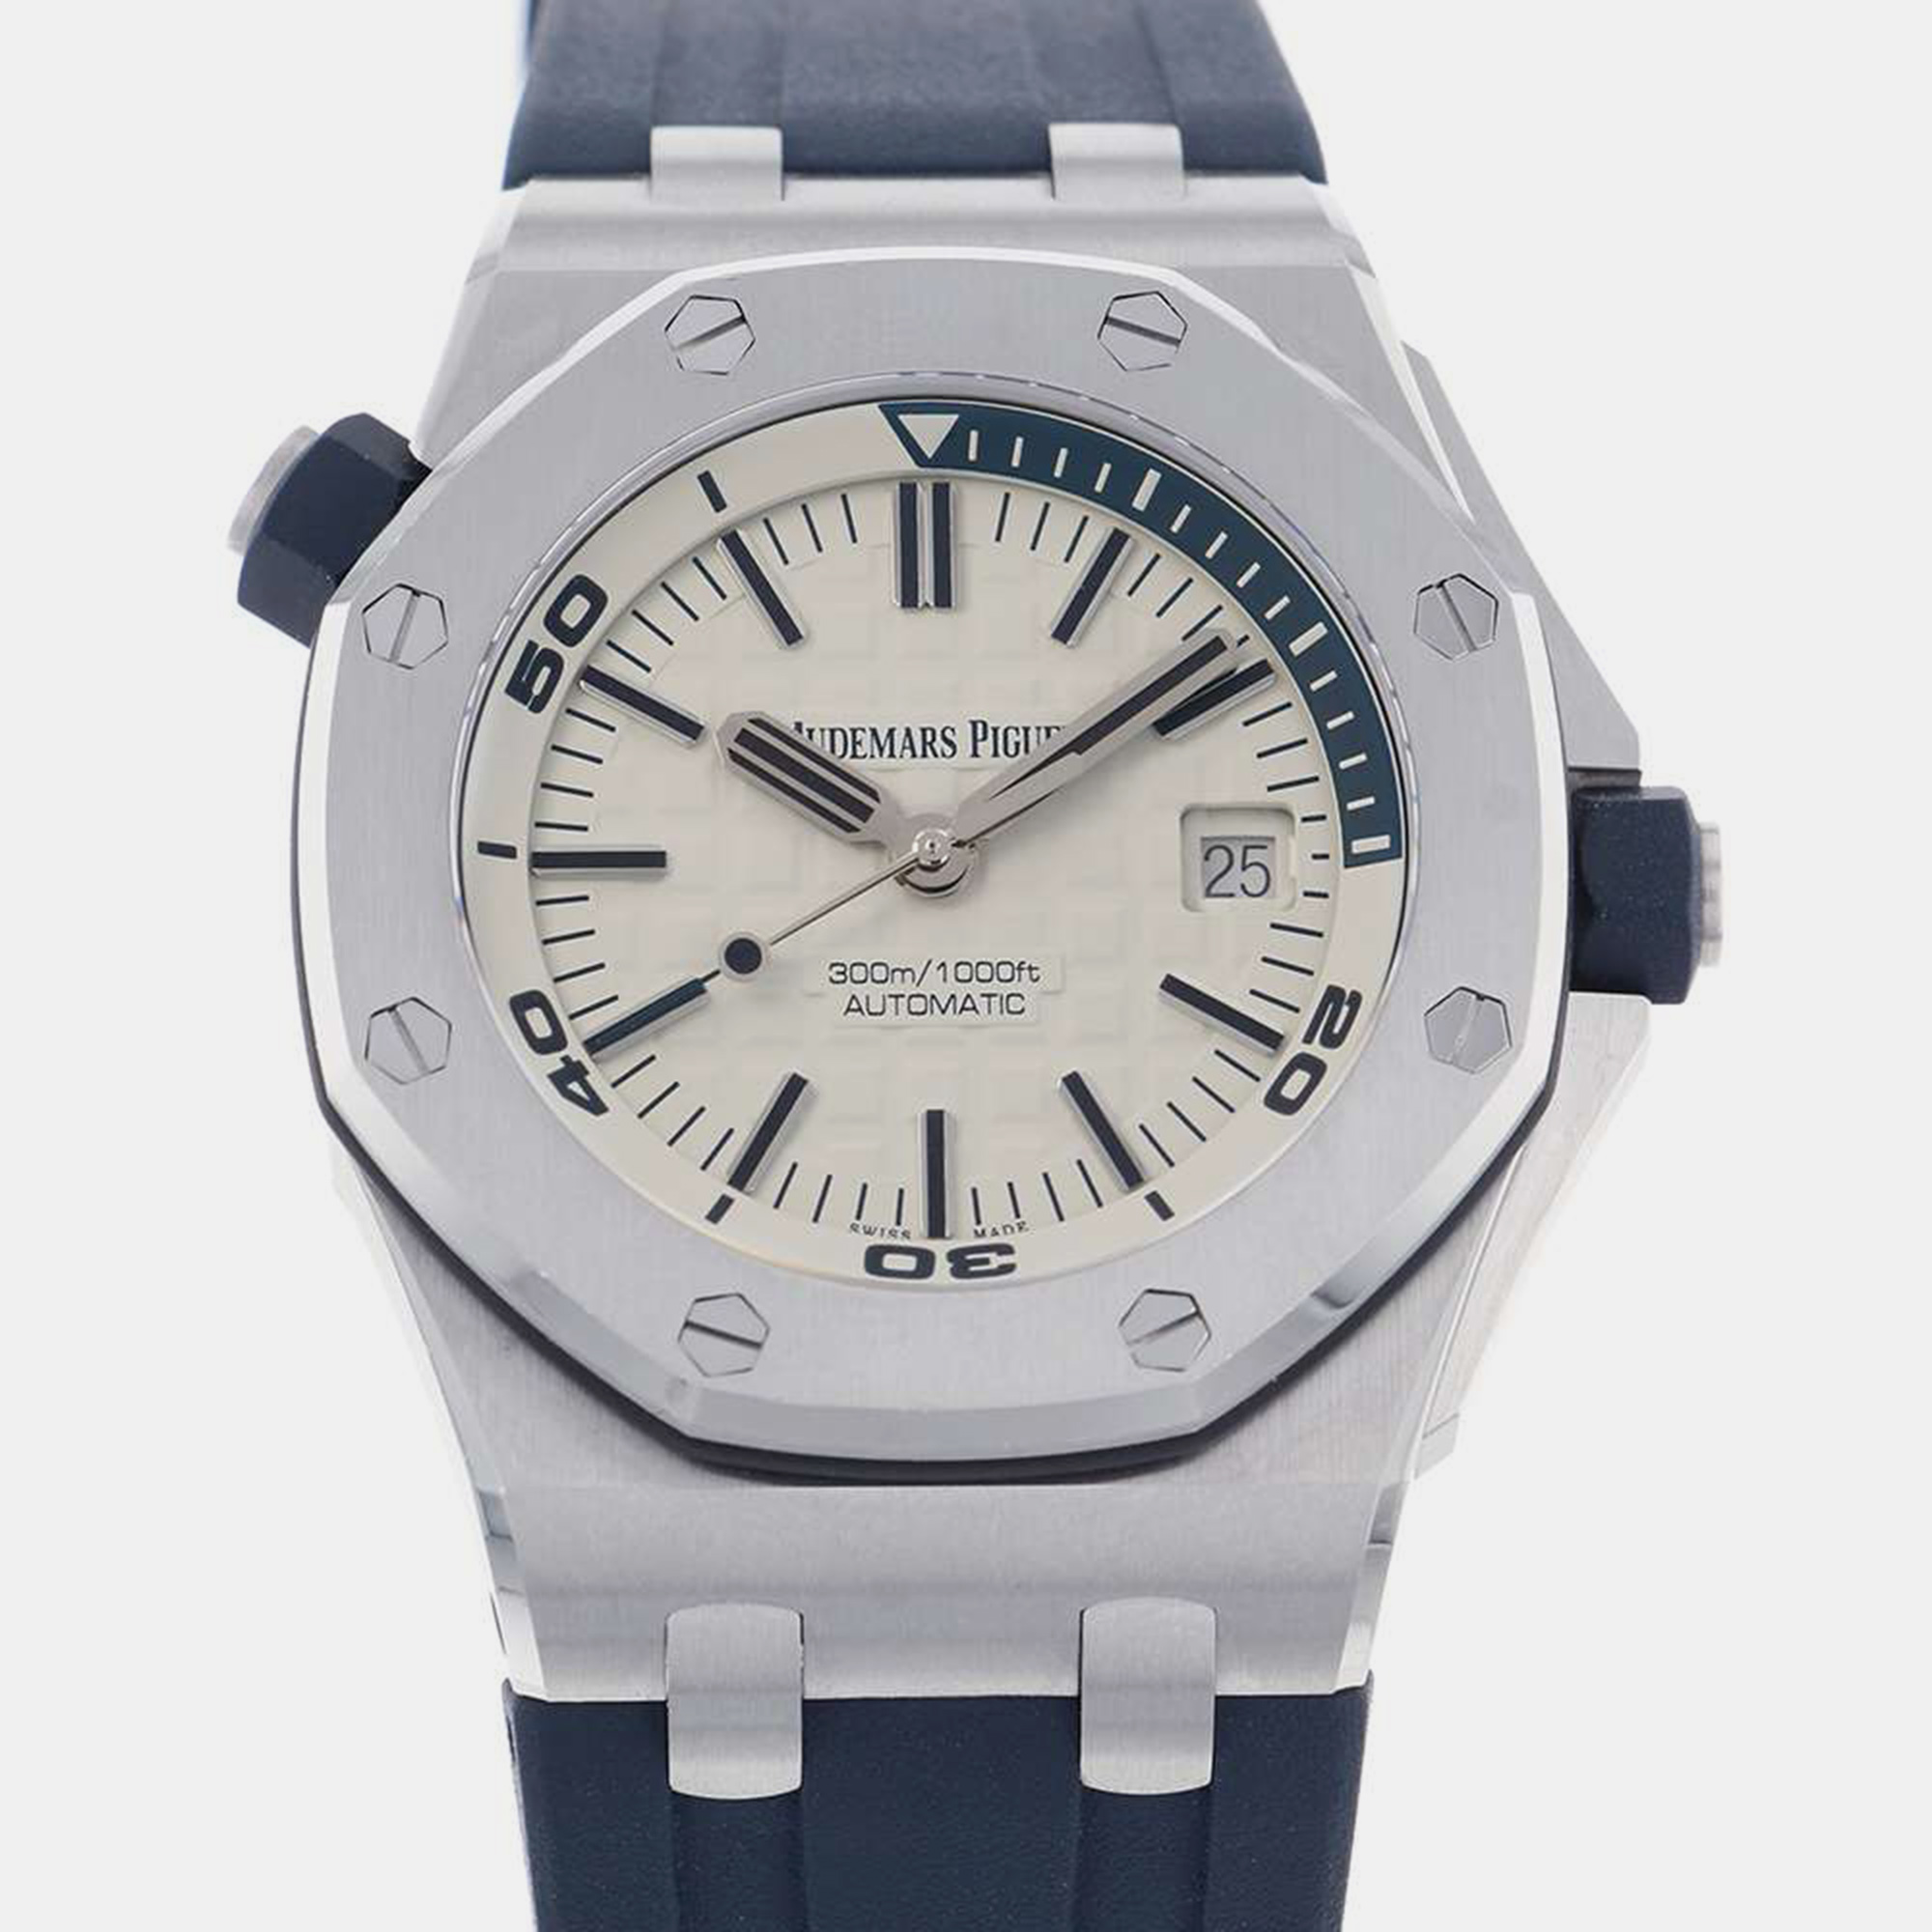 Pre-owned Audemars Piguet White Stainless Steel Royal Oak Offshore 15710st.oo.a010ca.01 Automatic Men's Wristwatch 42 Mm